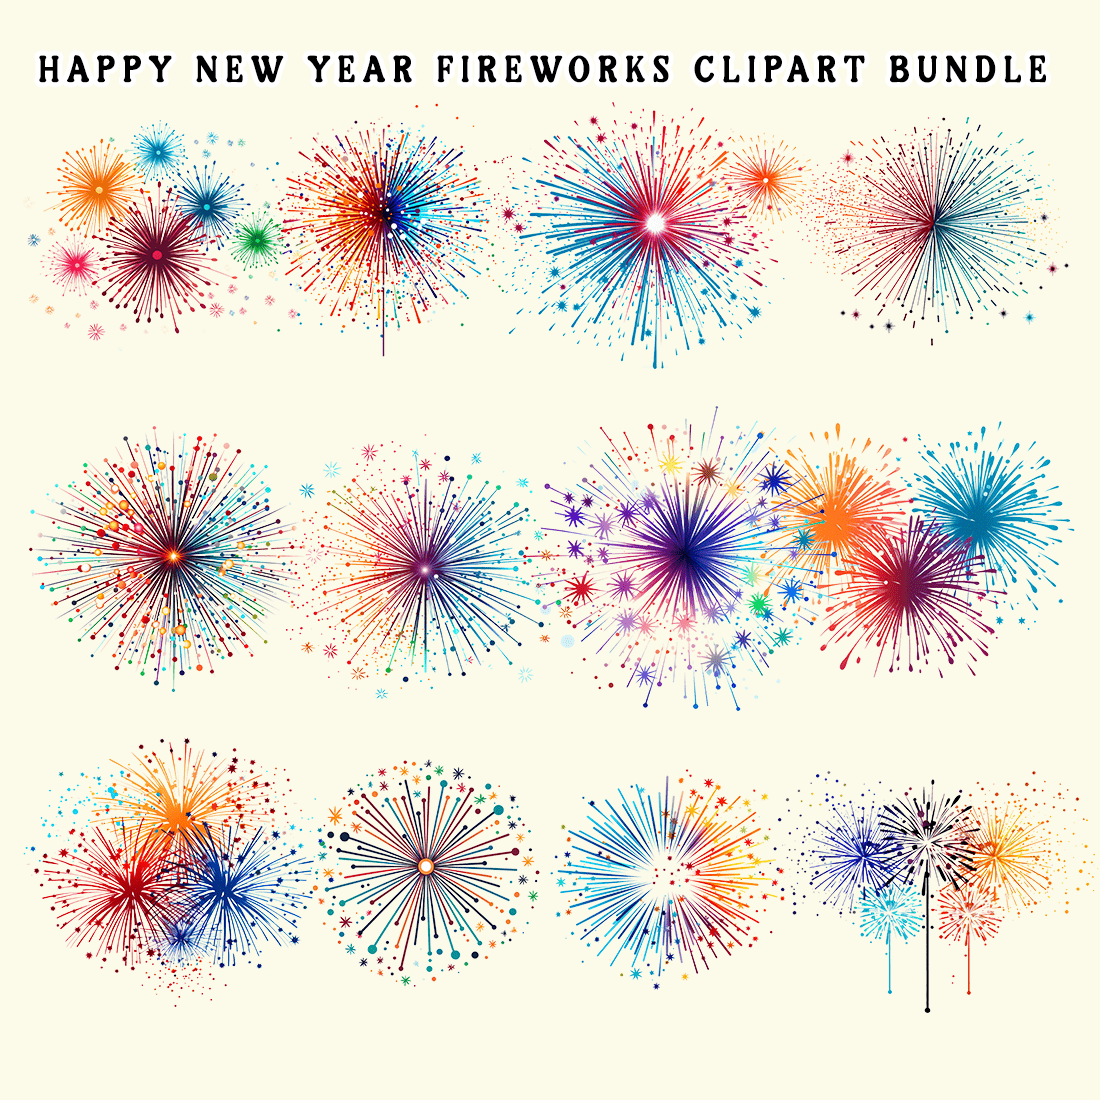 Happy New Year Fireworks Clipart Bundle preview image.